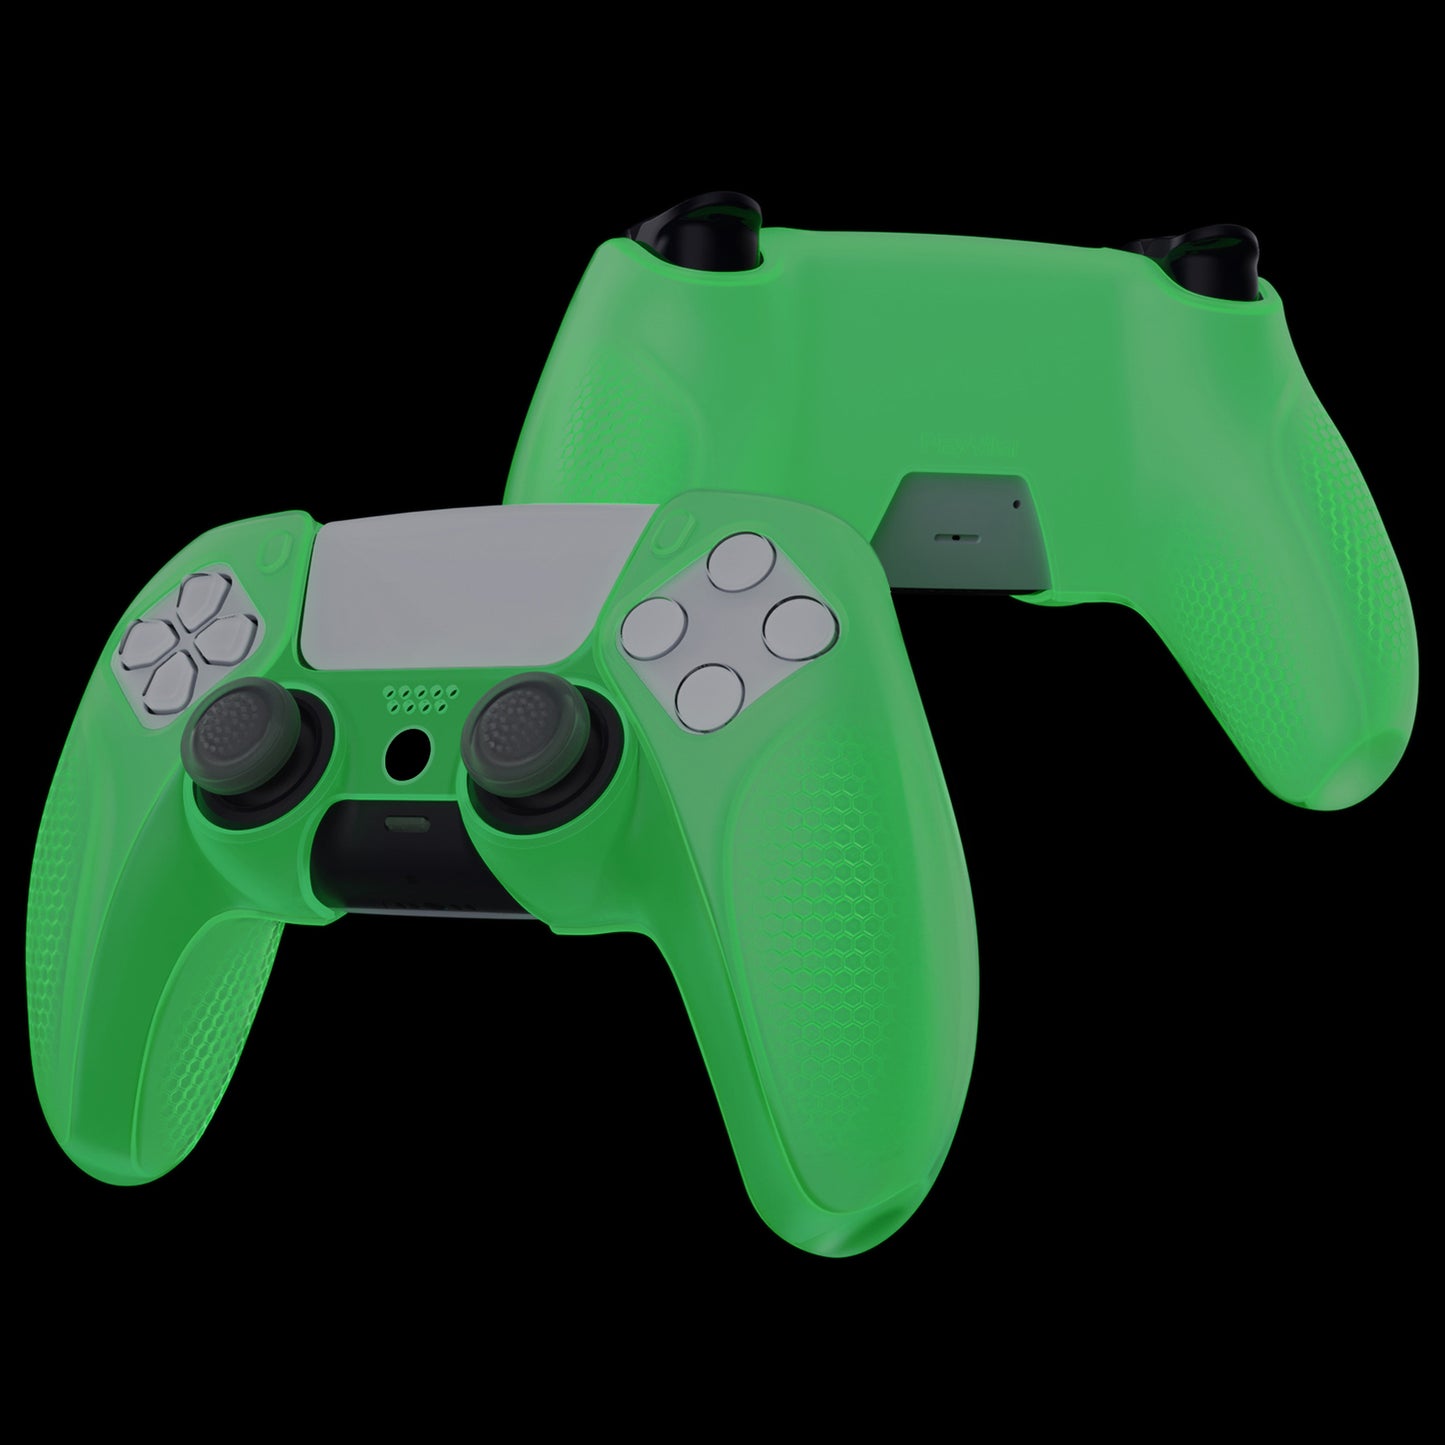 PlayVital Ninja Edition Anti-Slip Silicone Cover Skin with Thumb Grips for PS5 Wireless Controller, Compatible with Charging Station - Glow in Dark Green - MQRPFP006 PlayVital